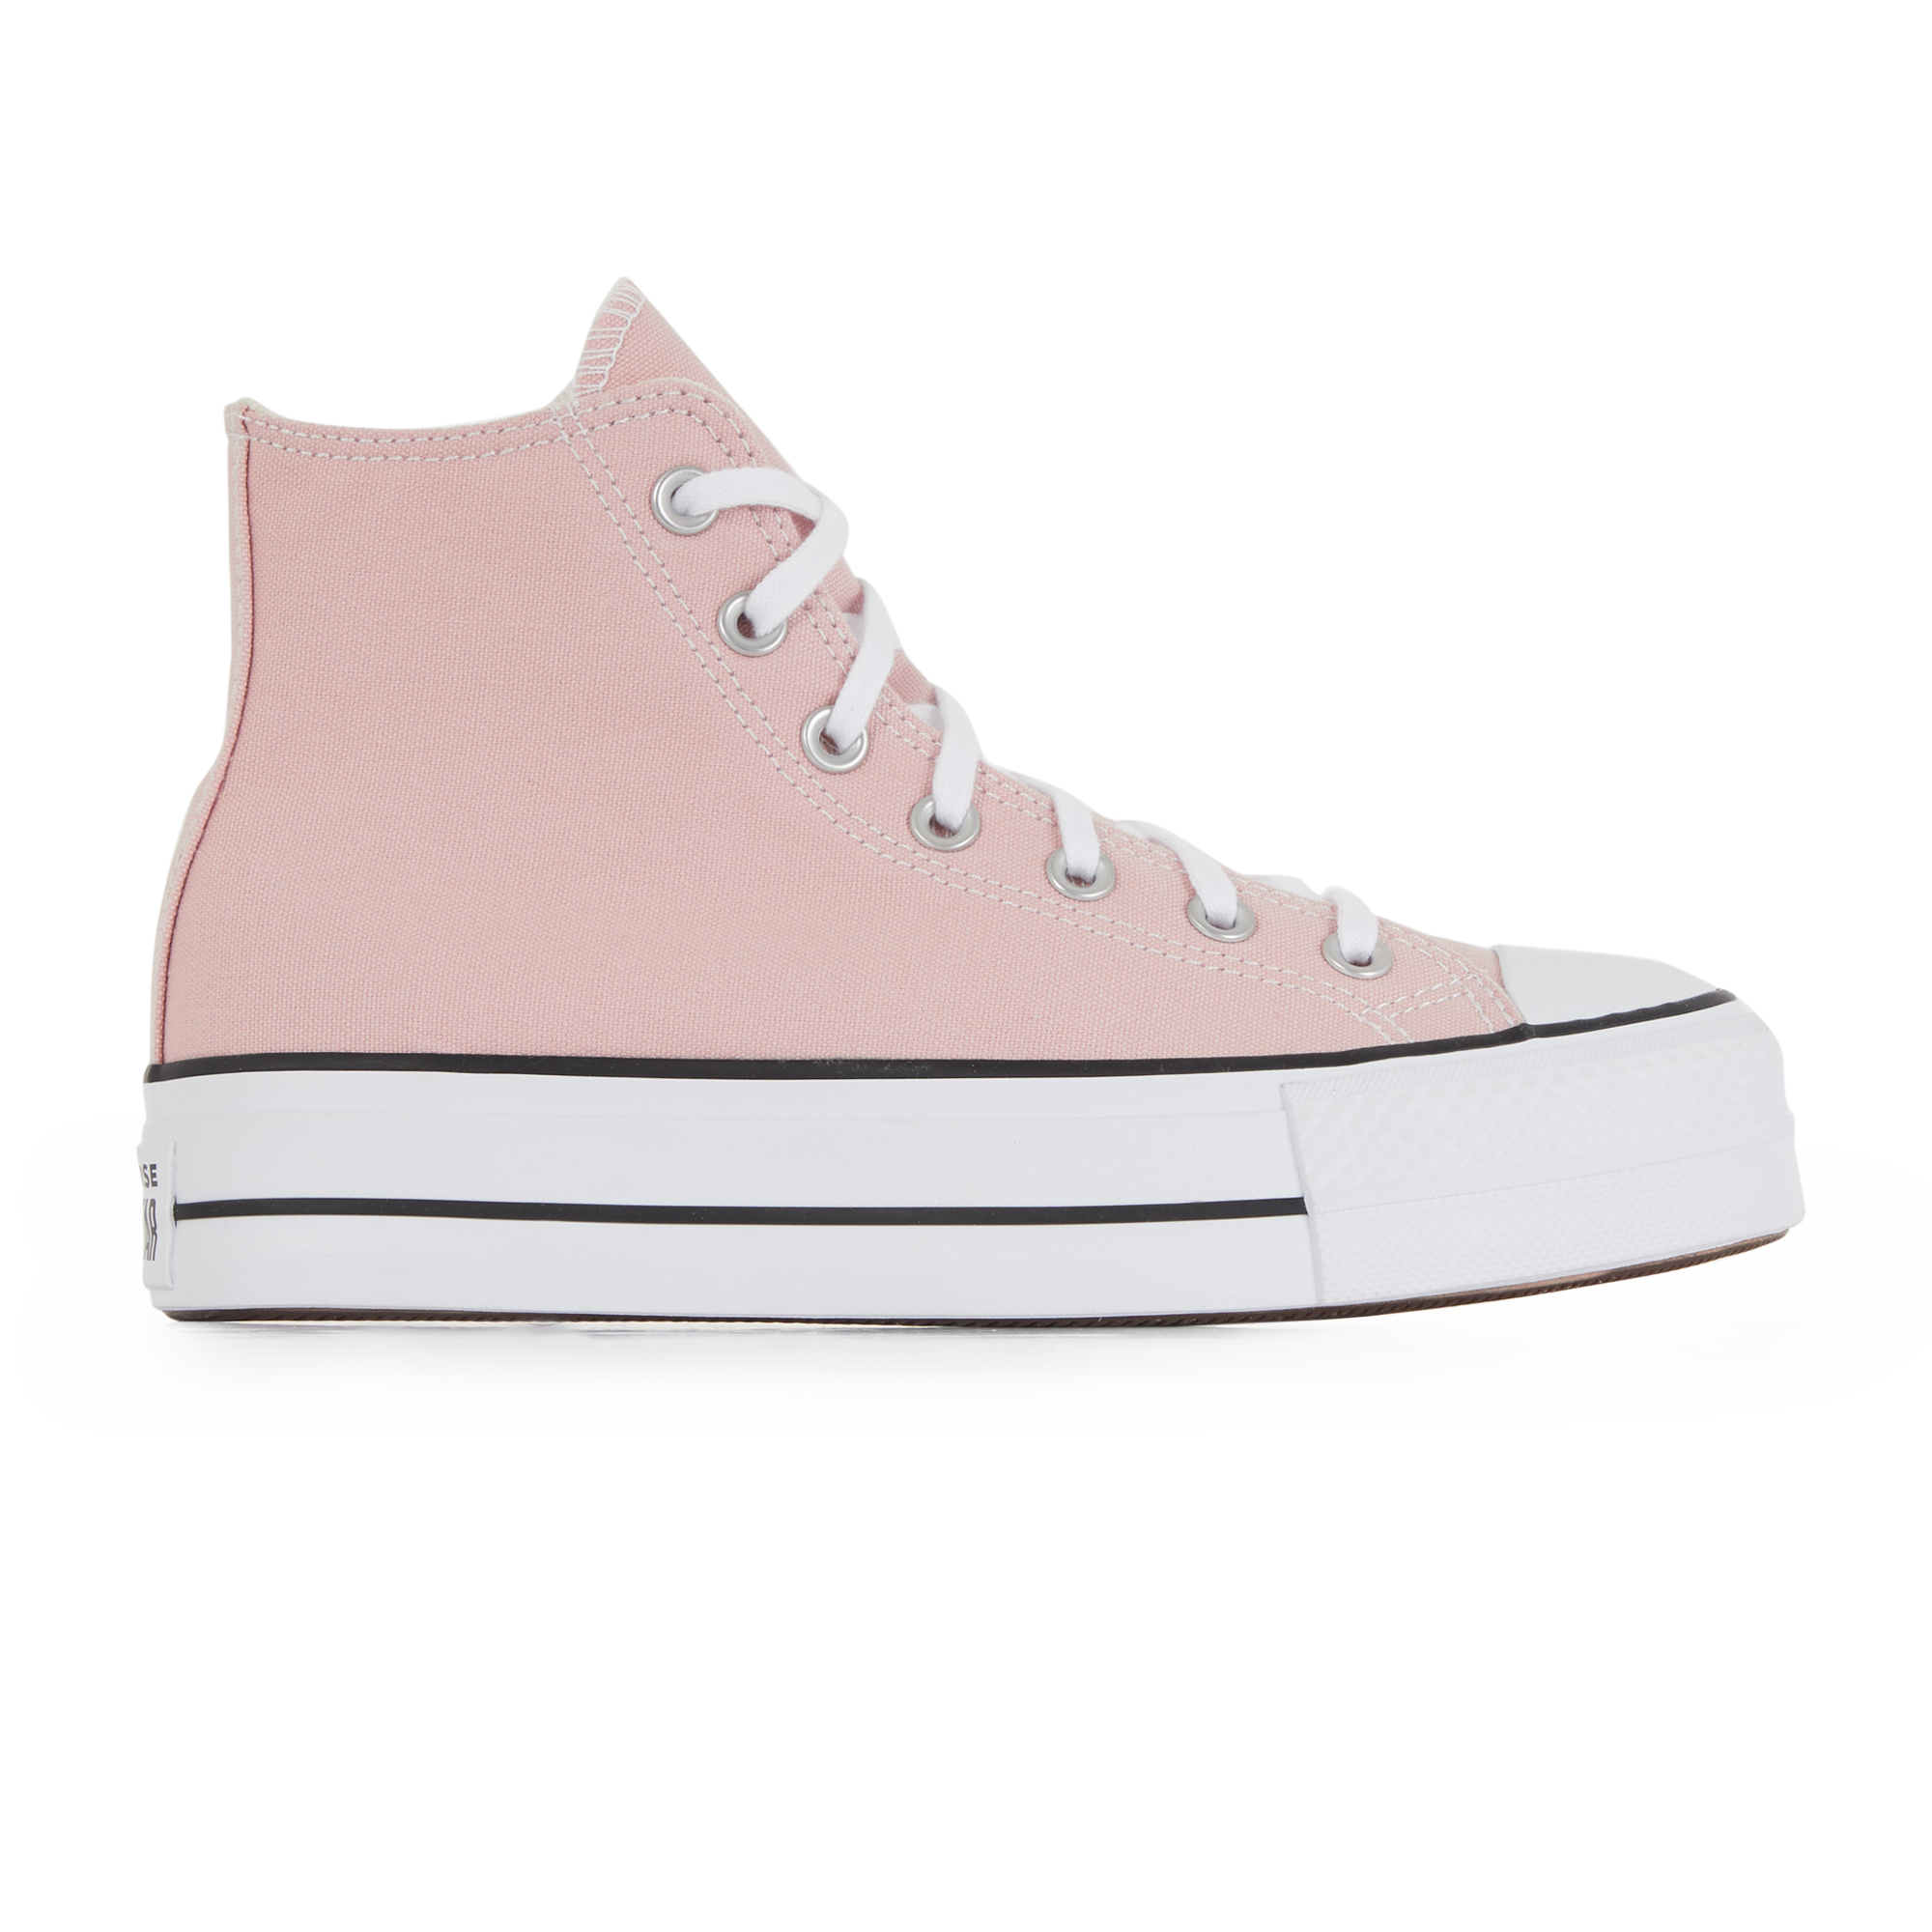 CONVERSE CHUCK TAYLOR ALL STAR LIFT HI ROZE - SNEAKERS Courir.be